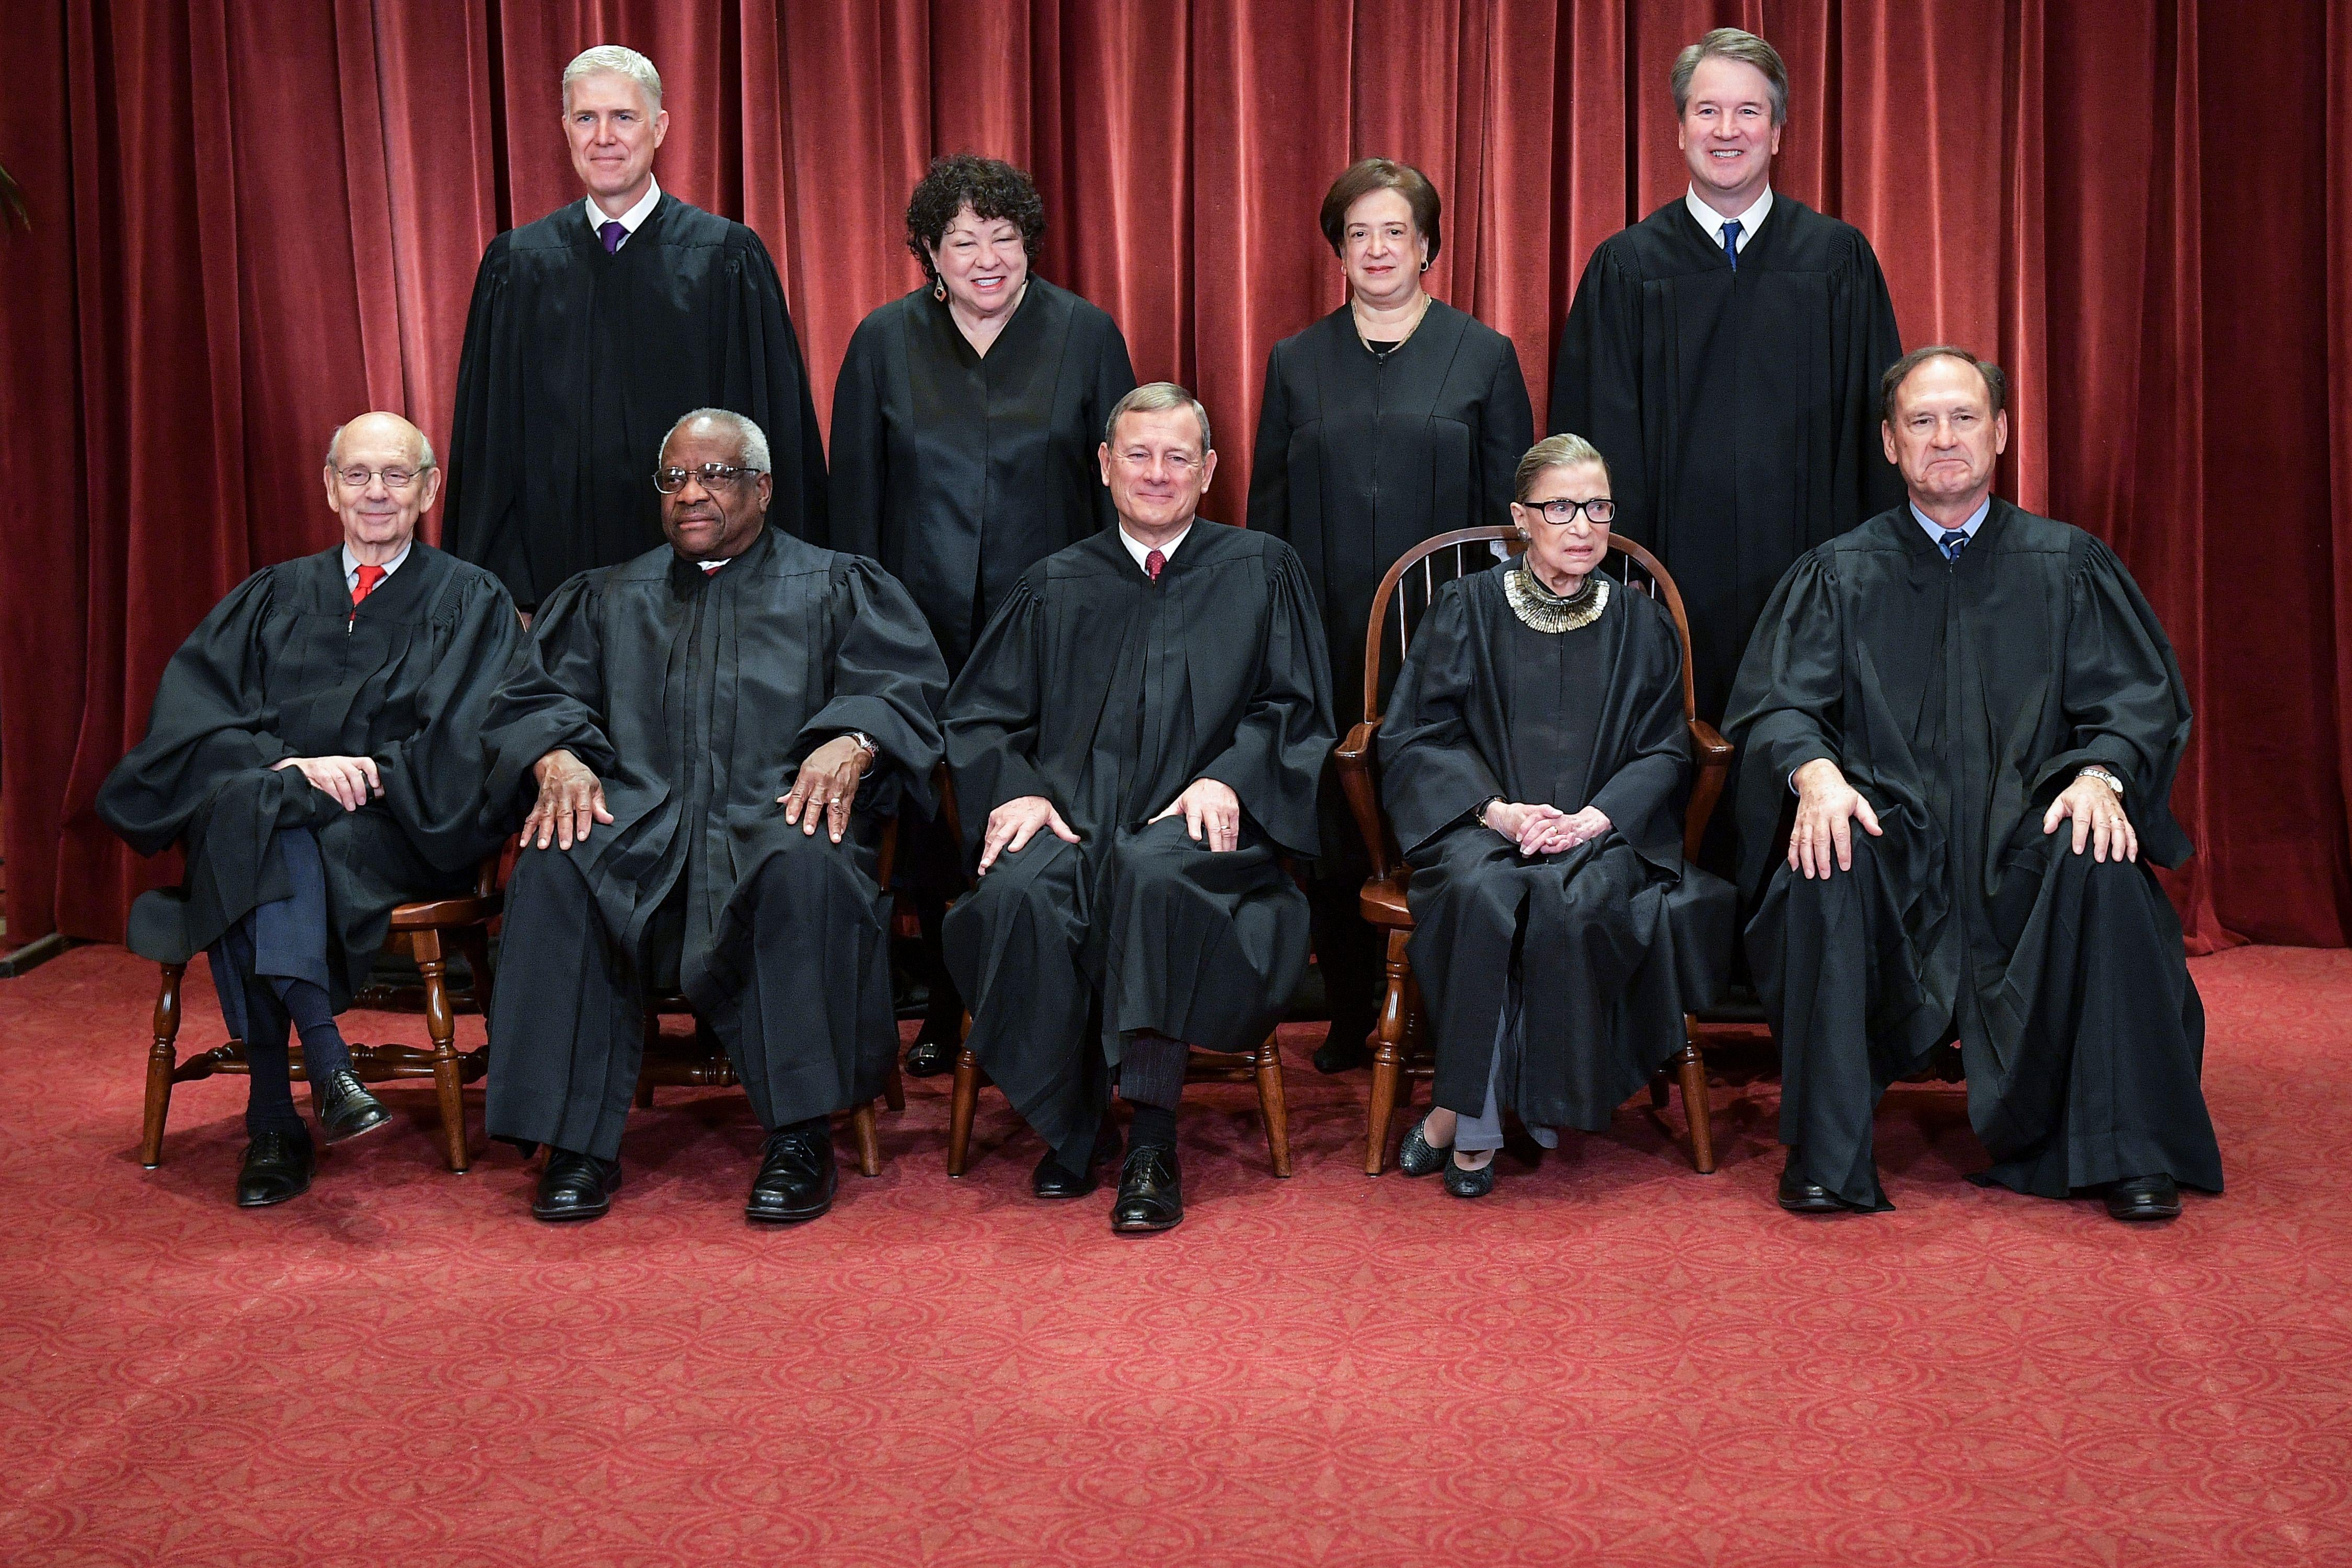 Neil Gorsuch, Sonia Sotomayor, Elena Kagan, and Brett Kavanaugh standing, and Stephen Breyer, Clarence Thomas, John Roberts, Ruth Bader Ginsburg, and Samuel Alito seated, all in their robes